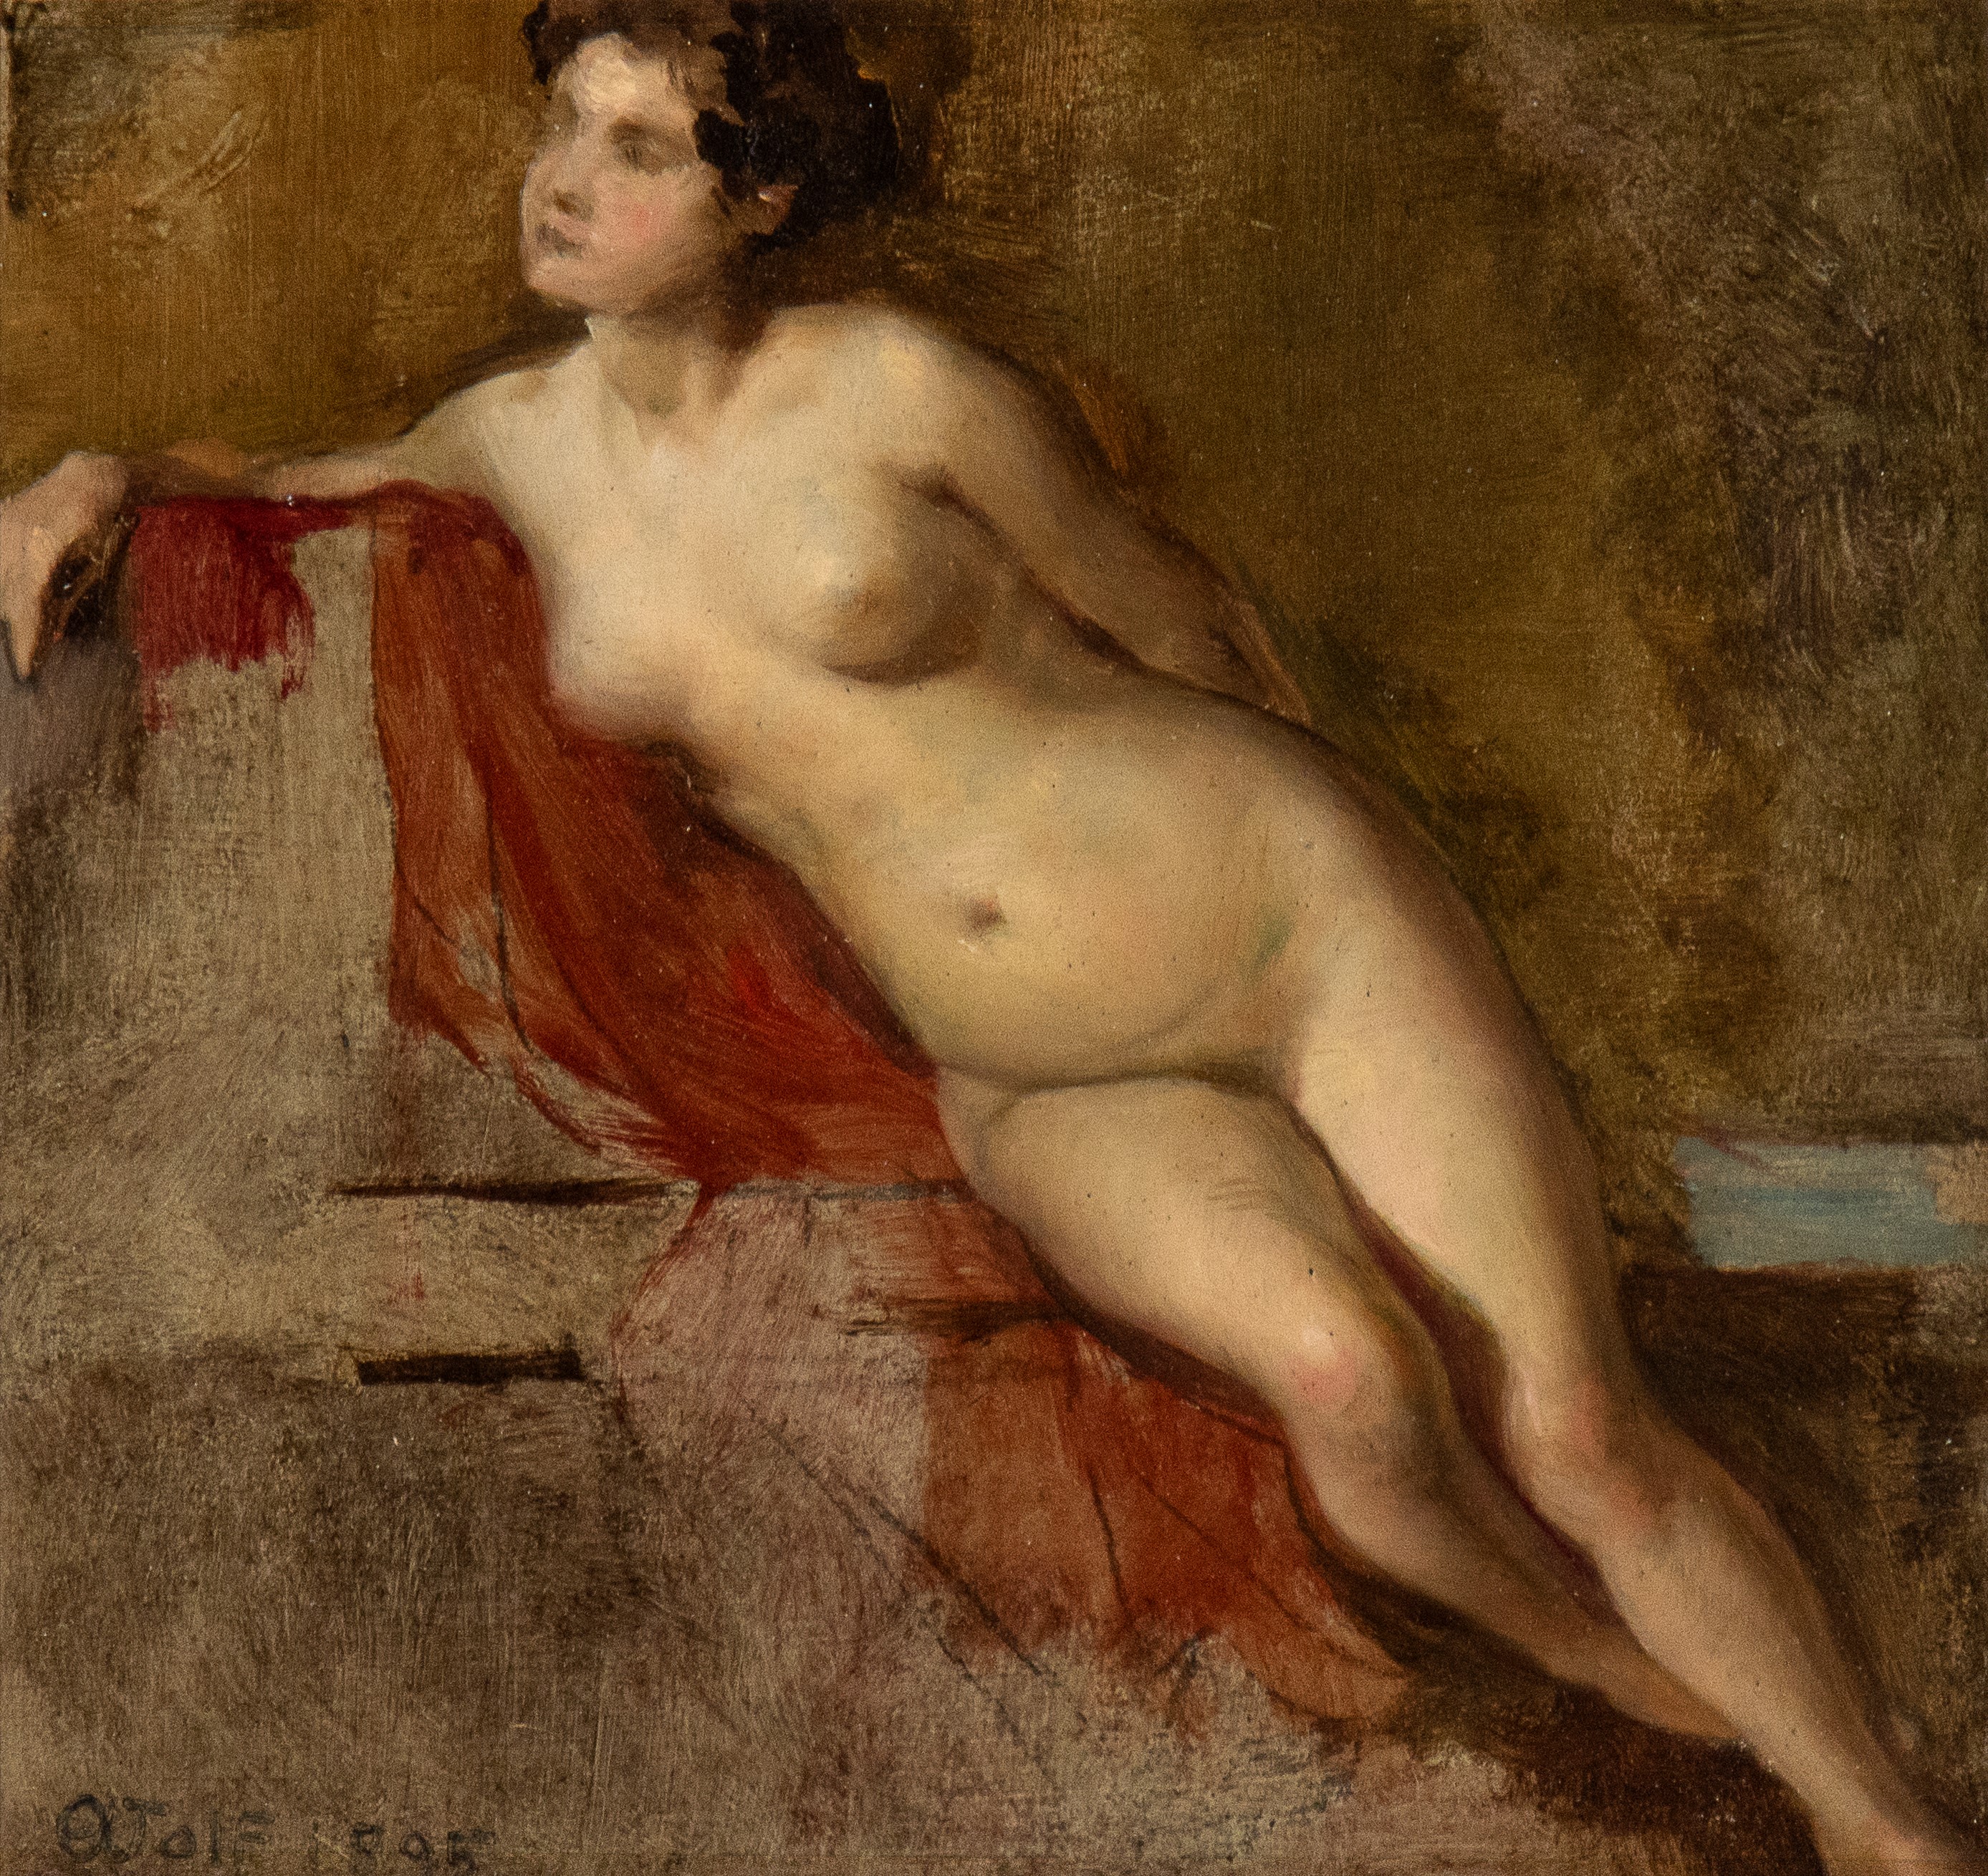 TEODORO WOLF FERRARI : Study for a nude (1895) - Oil on board - Auction  Modern and contemporary art: paintings, drawings, sculptures and ceramics  from 19th and 20th centuries - Bertolami Fine Art - Casa d'Aste